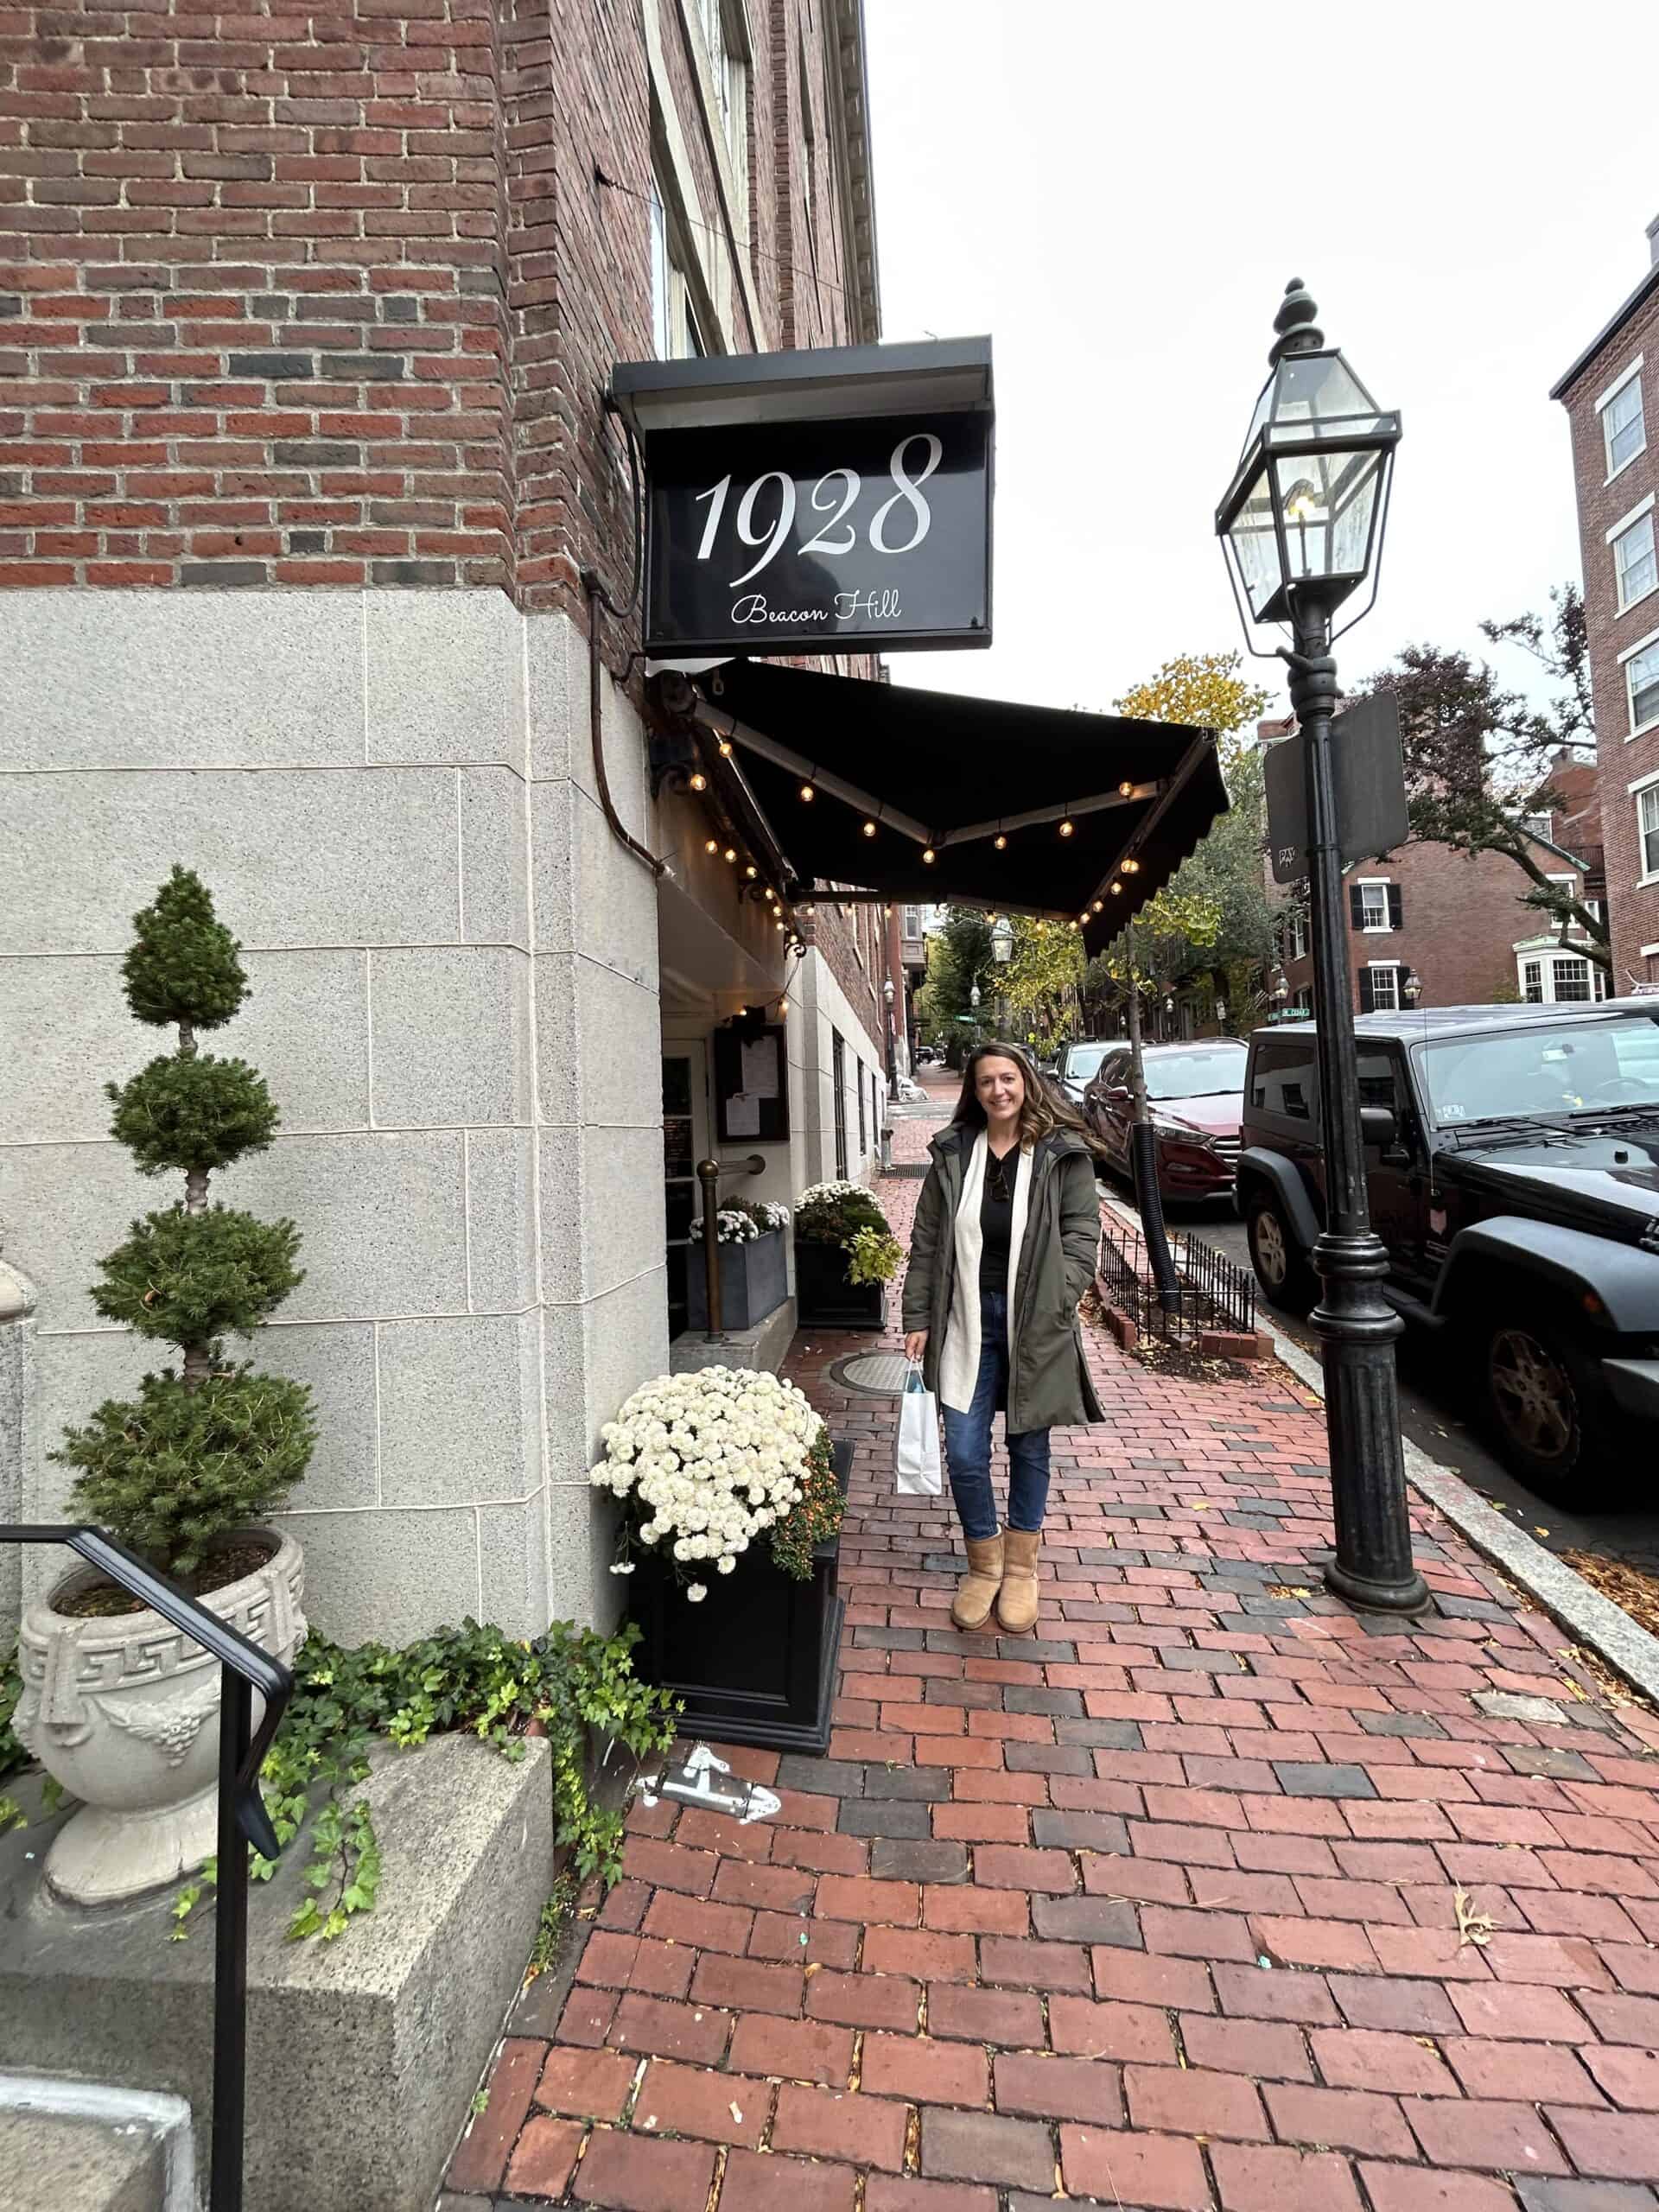 Everything Old Feels New Again at 1928 Beacon Hill — Resy